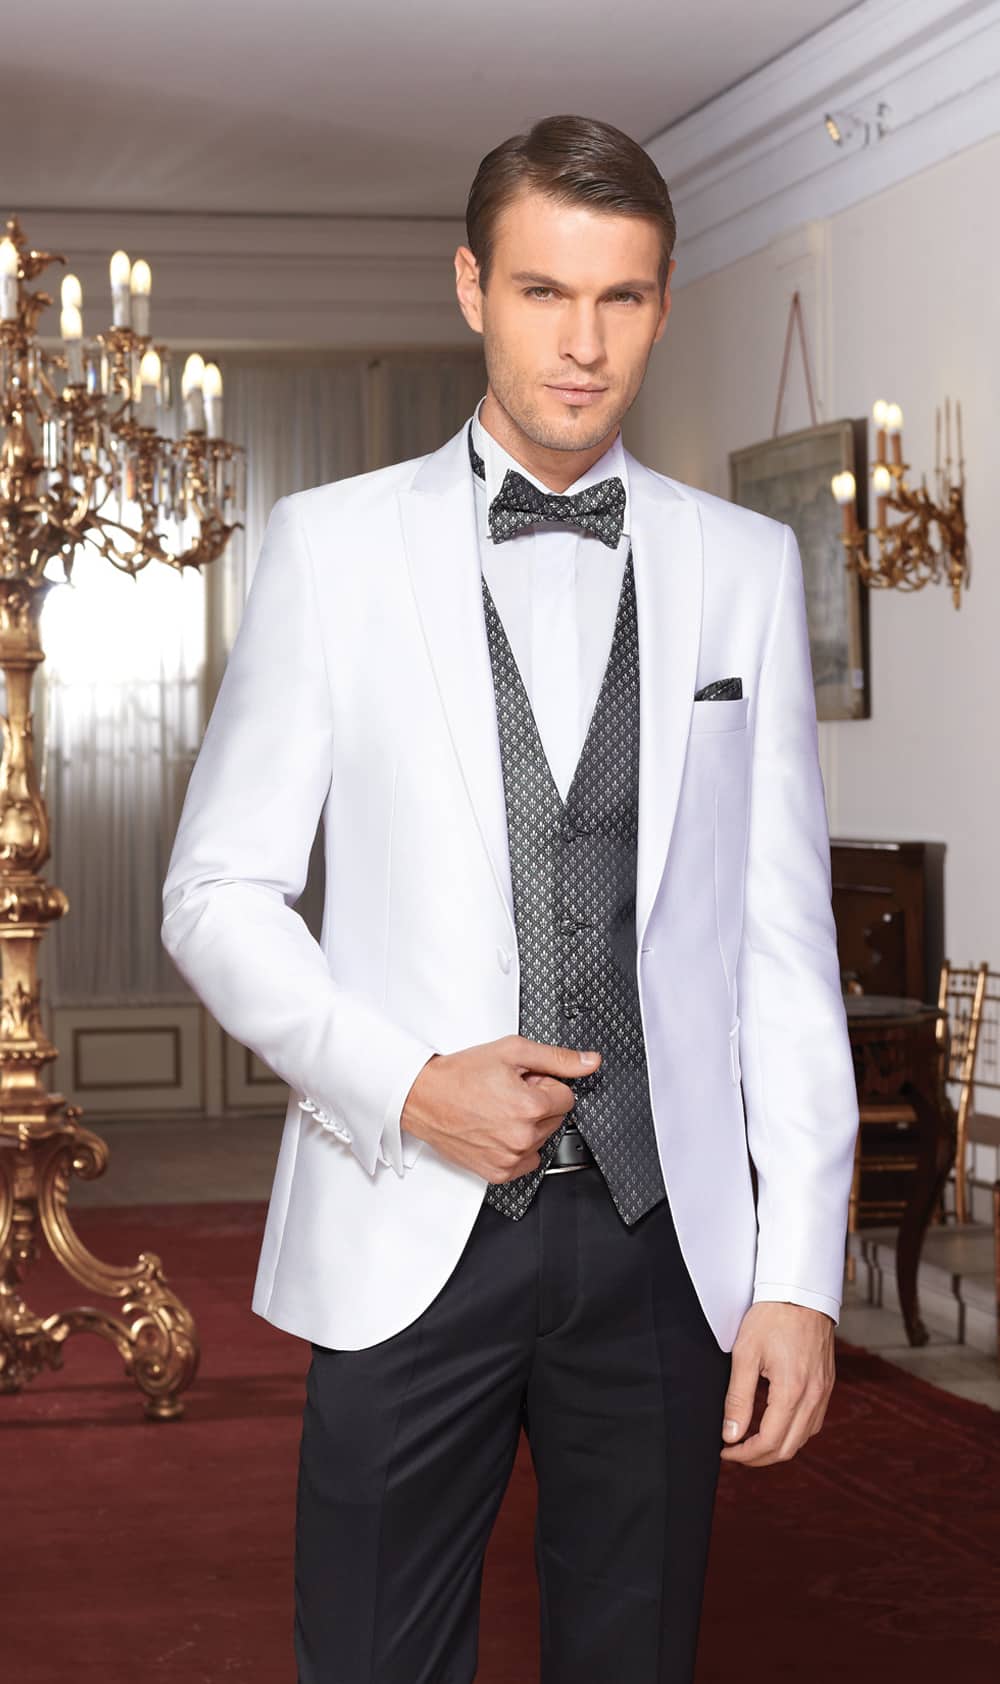 Suit Up the Bond Way at Formal Tailor - tuxedo - suit (2)